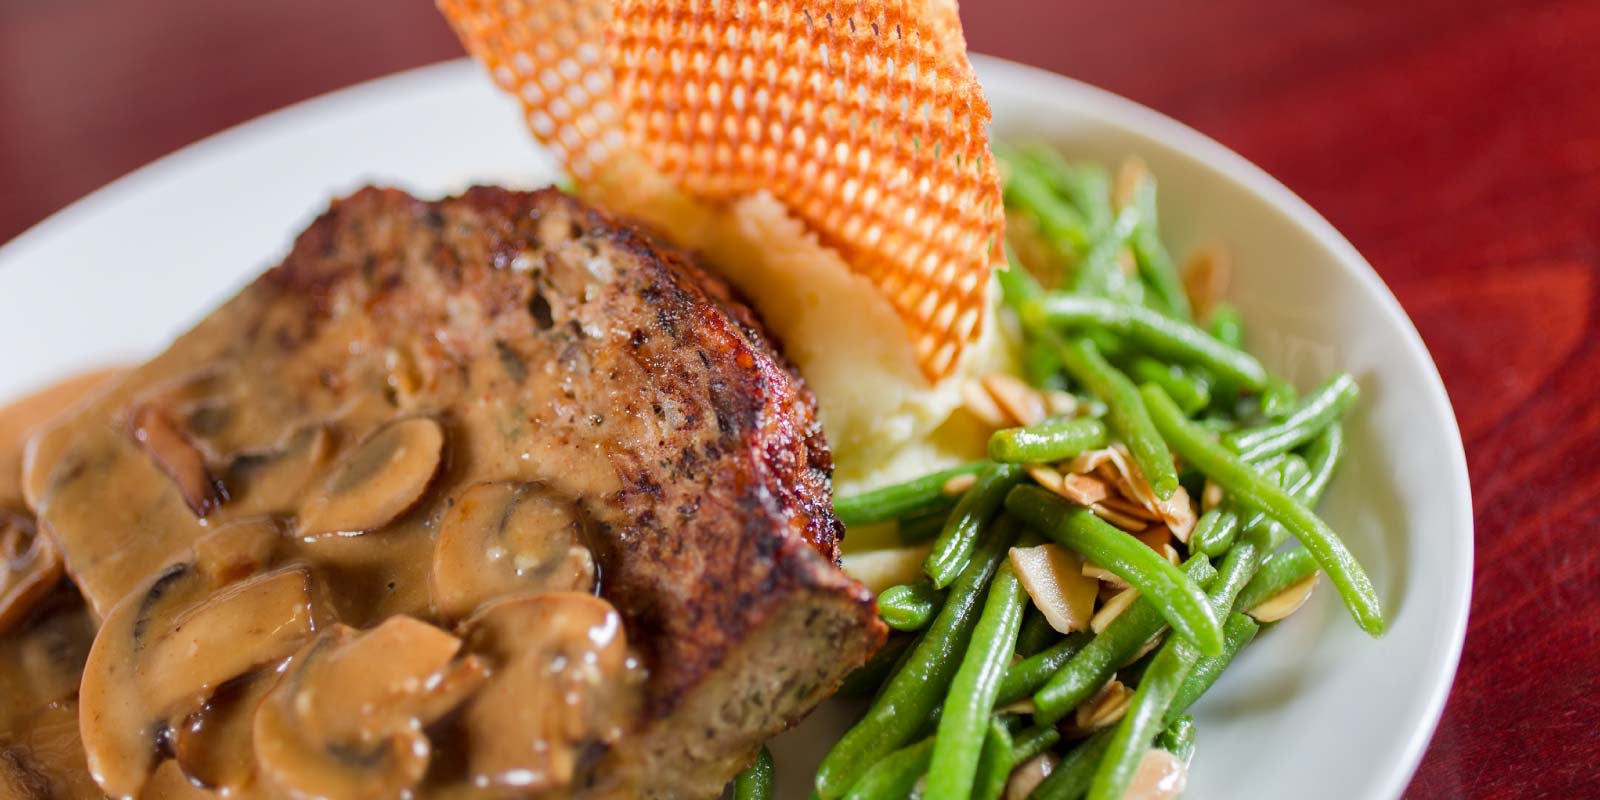 Turkey Meatloaf dish with mushroom sauce and green beans